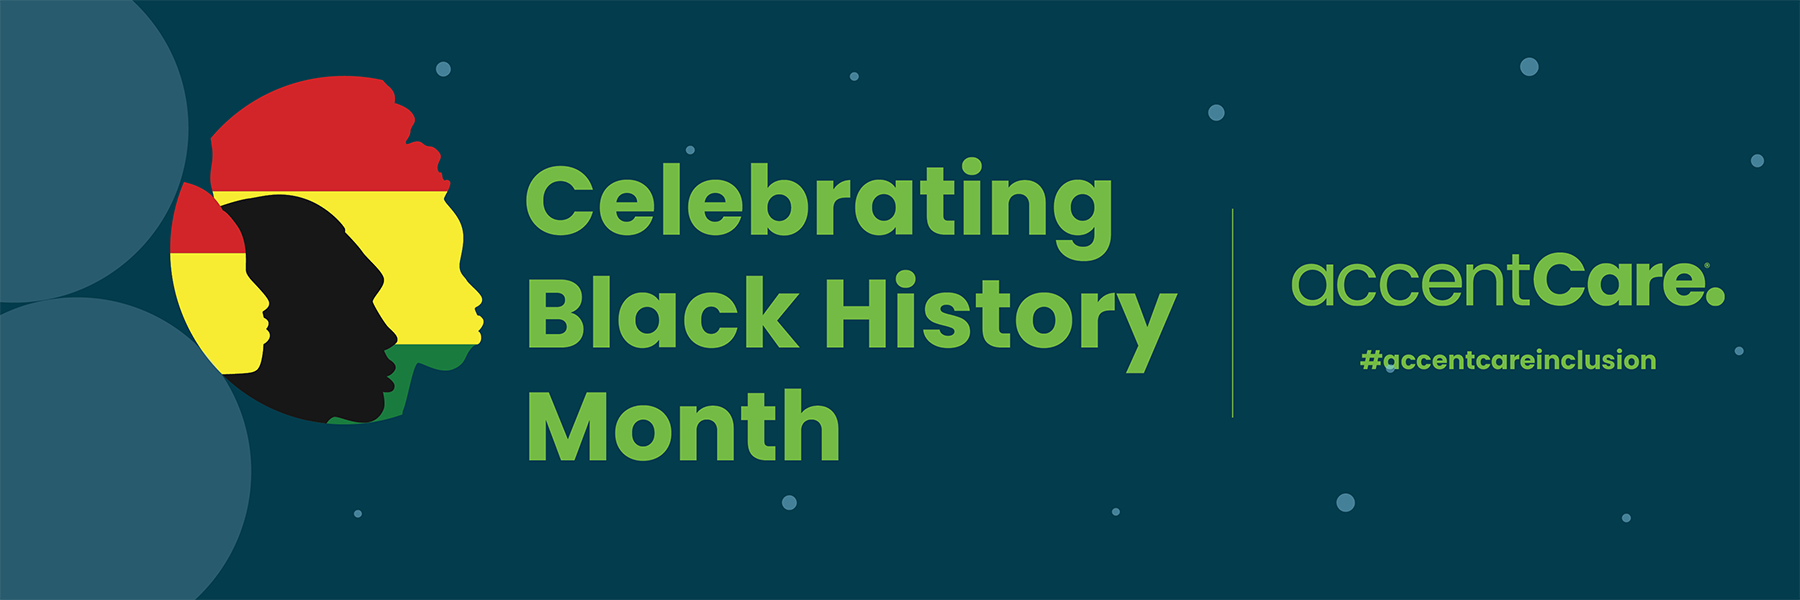 Celebrating Black History Month: Hear from Our AccentCare Staff